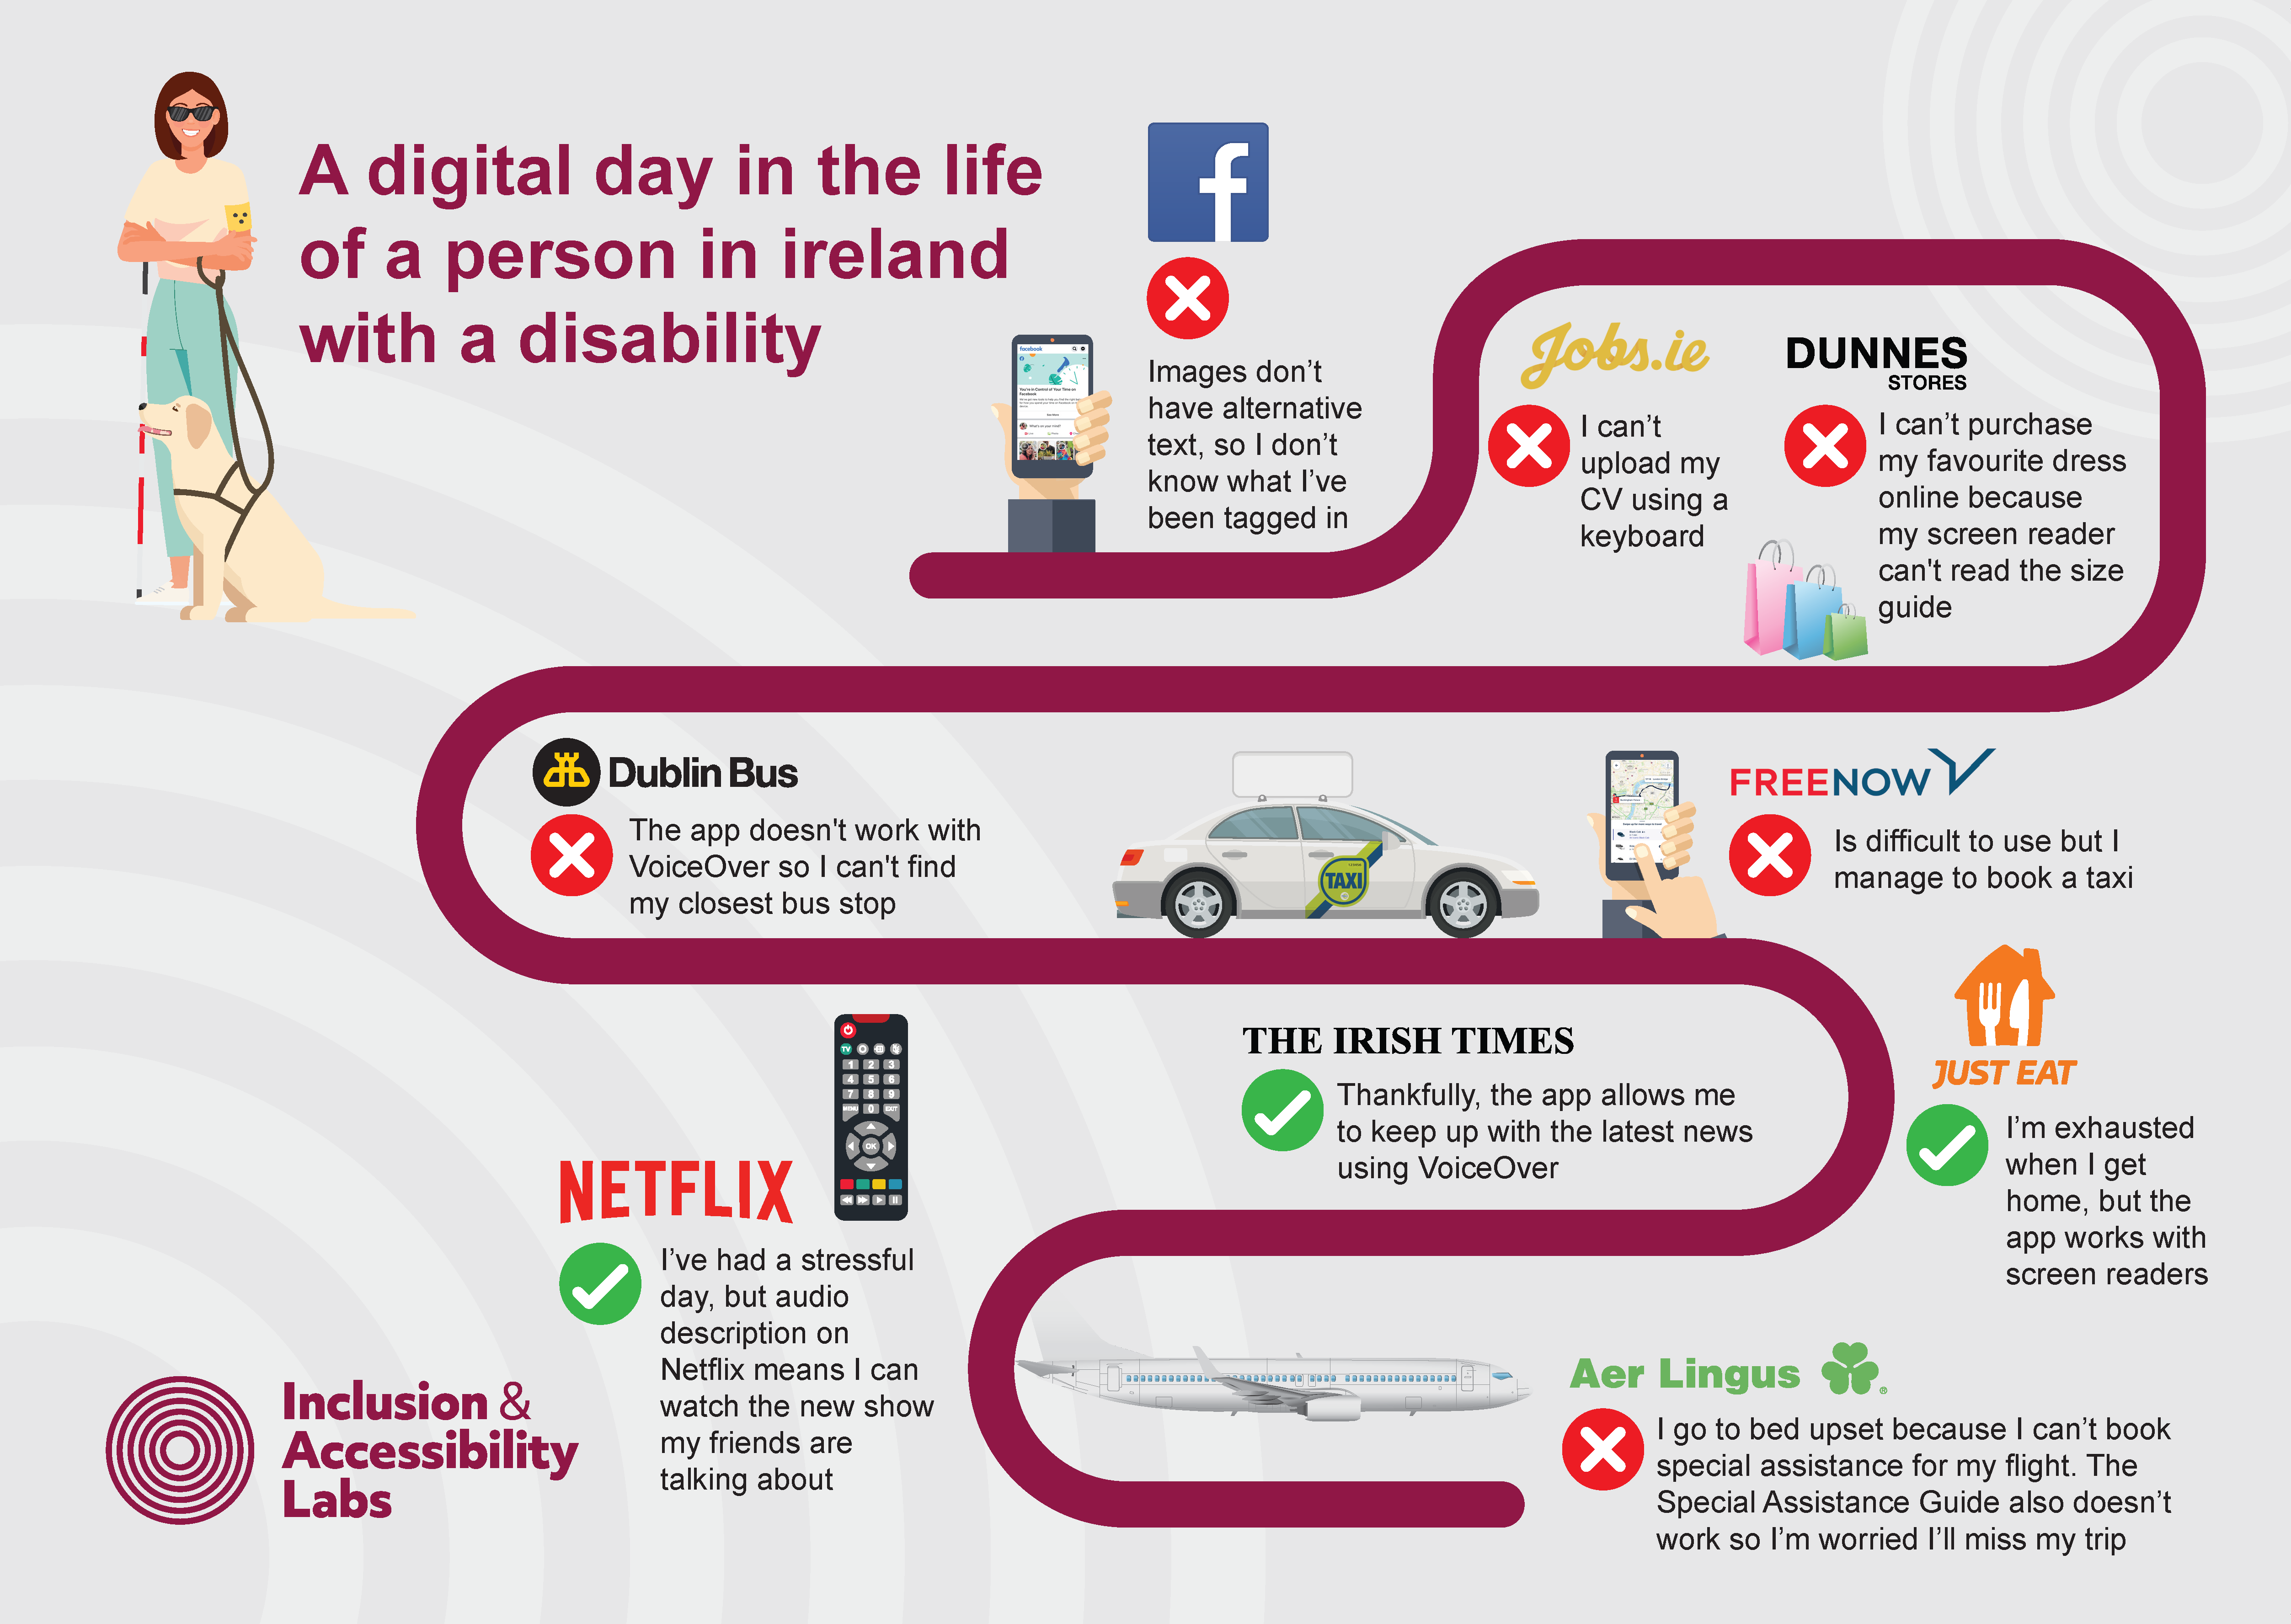 Digital Day infographic, full text alternative is on this page